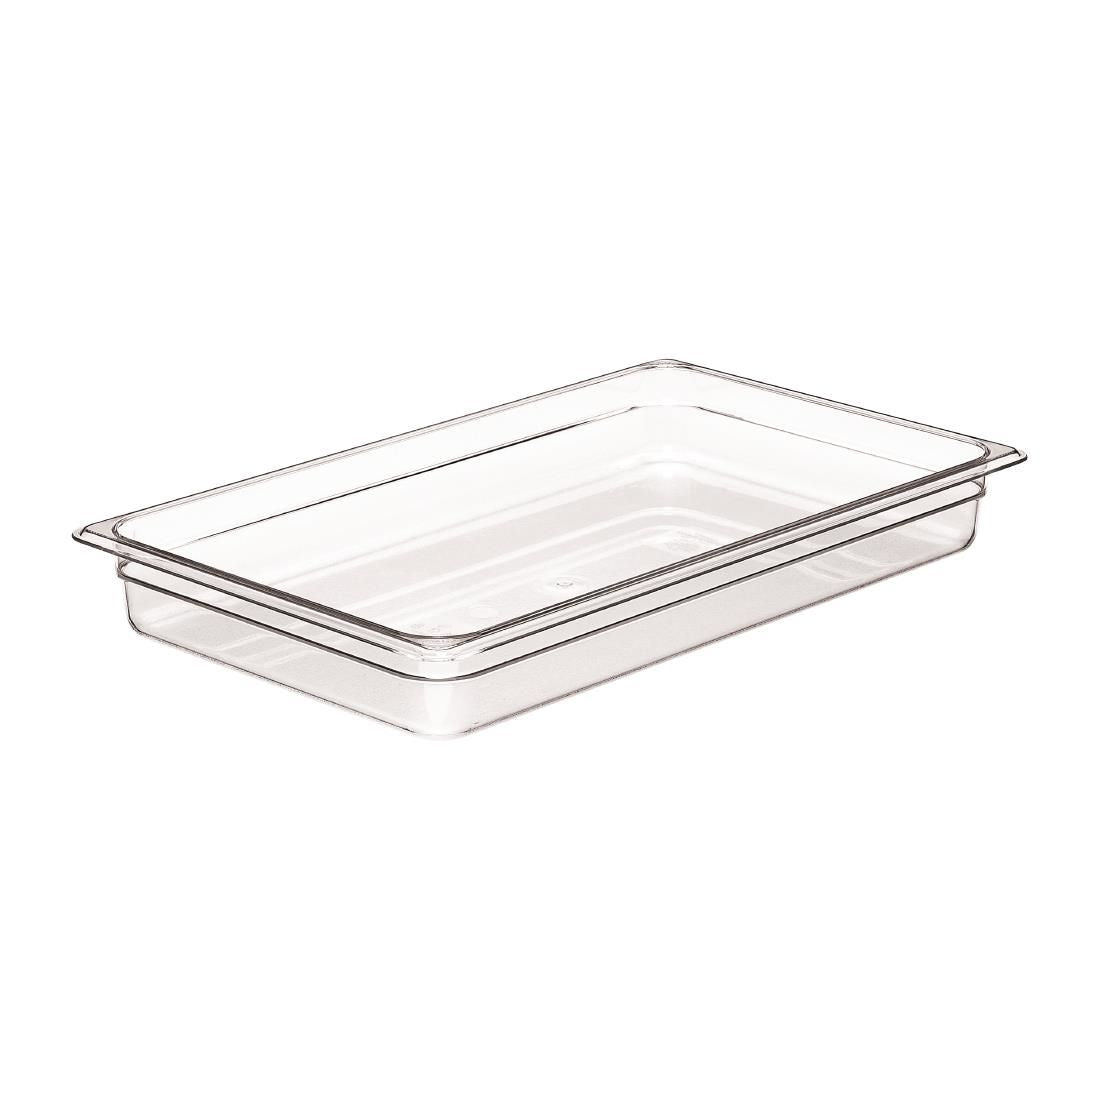 DM740 Cambro Polycarbonate 1/1 Gastronorm Pan 65mm JD Catering Equipment Solutions Ltd